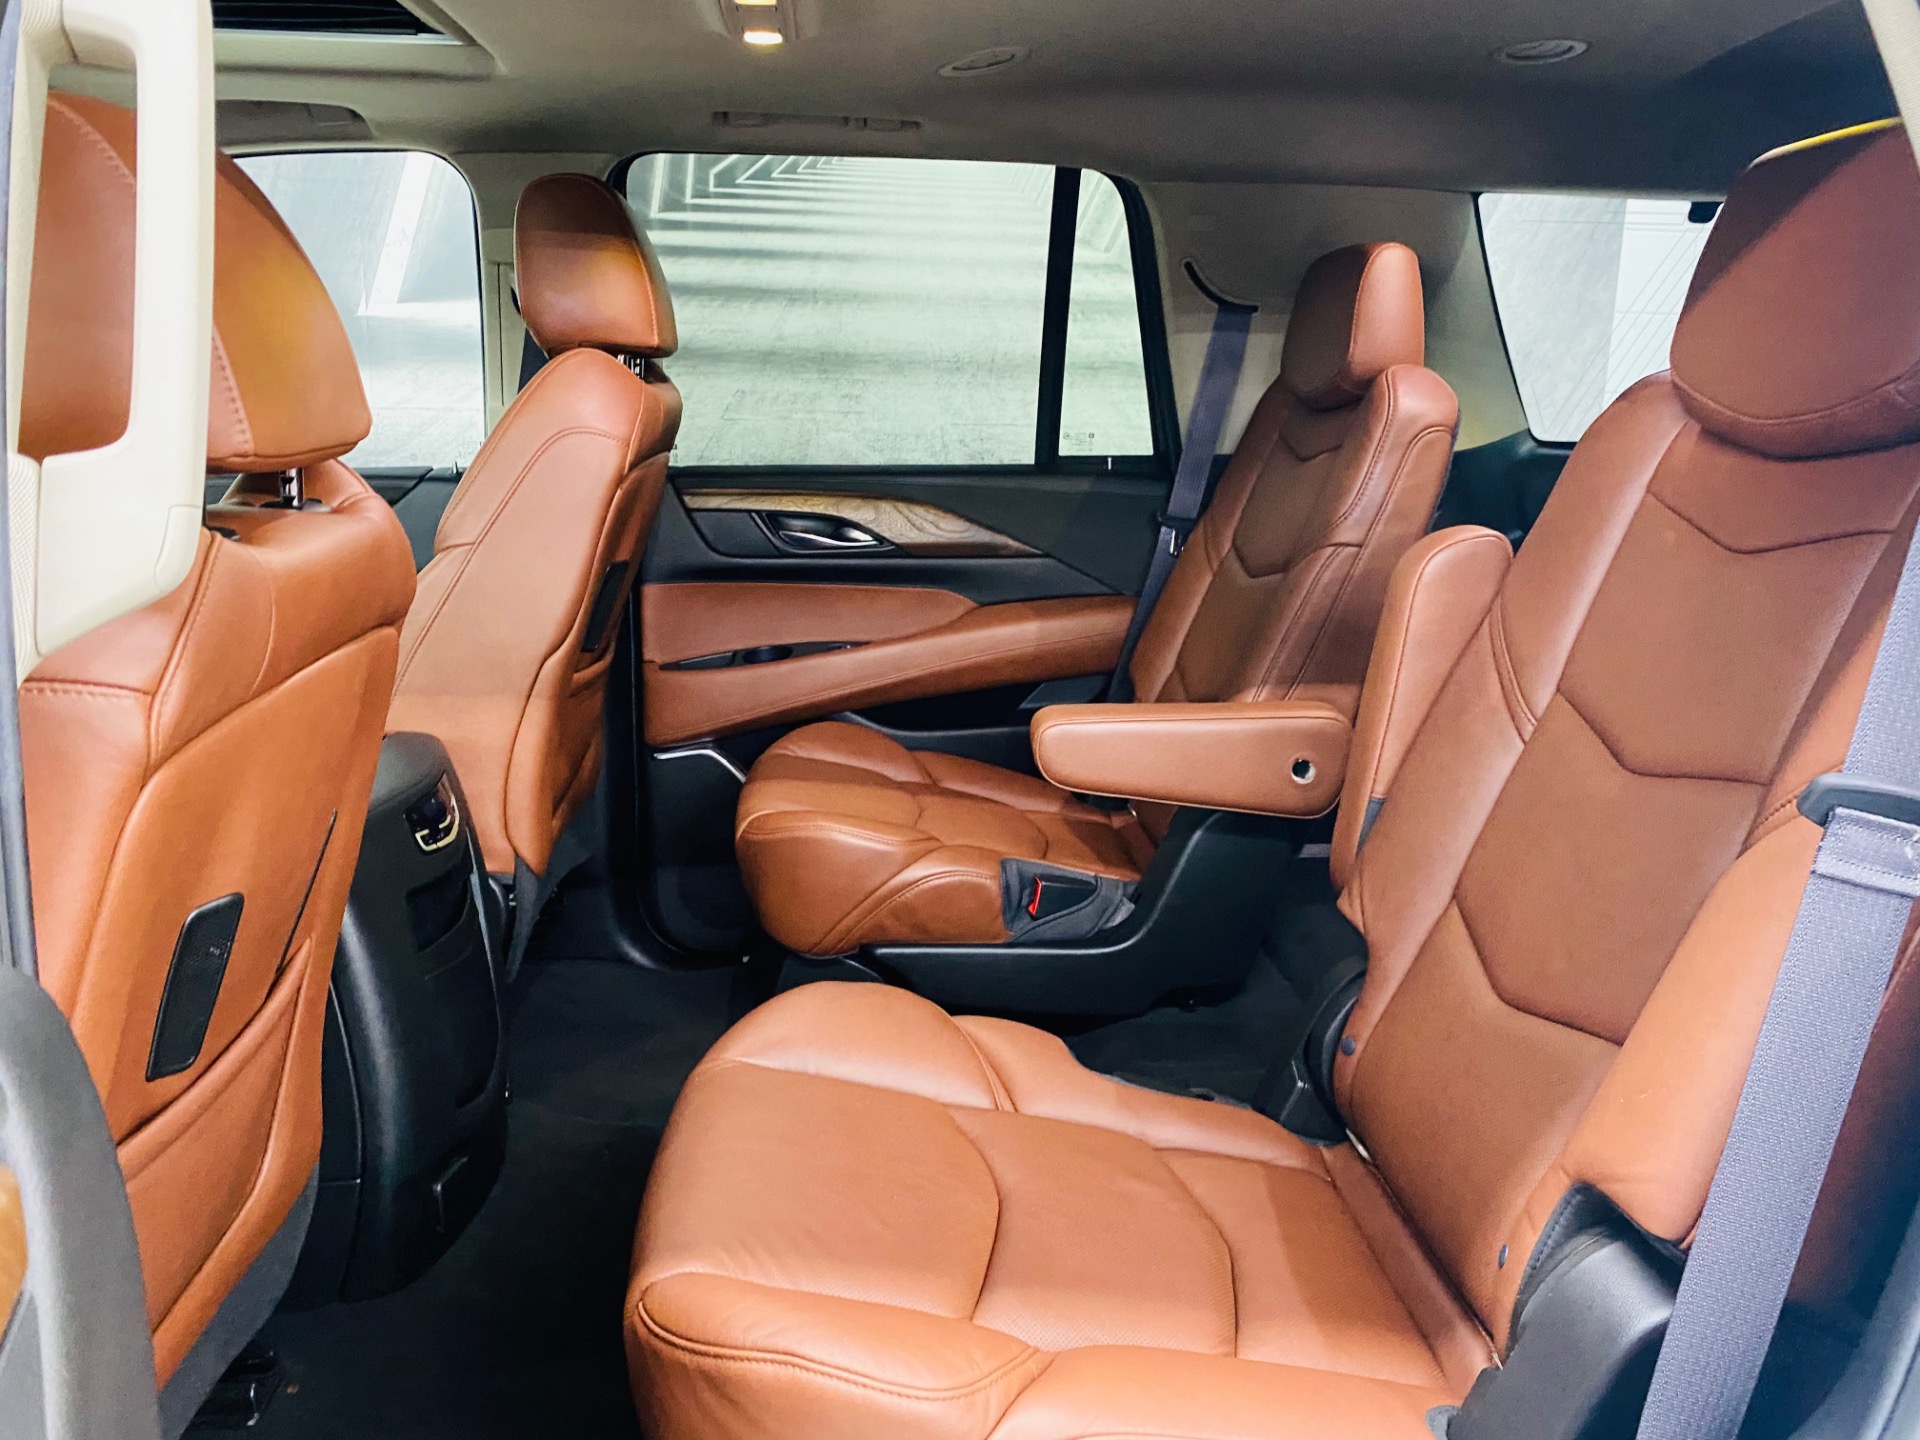 Used Cadillac with Leather Seats for Sale